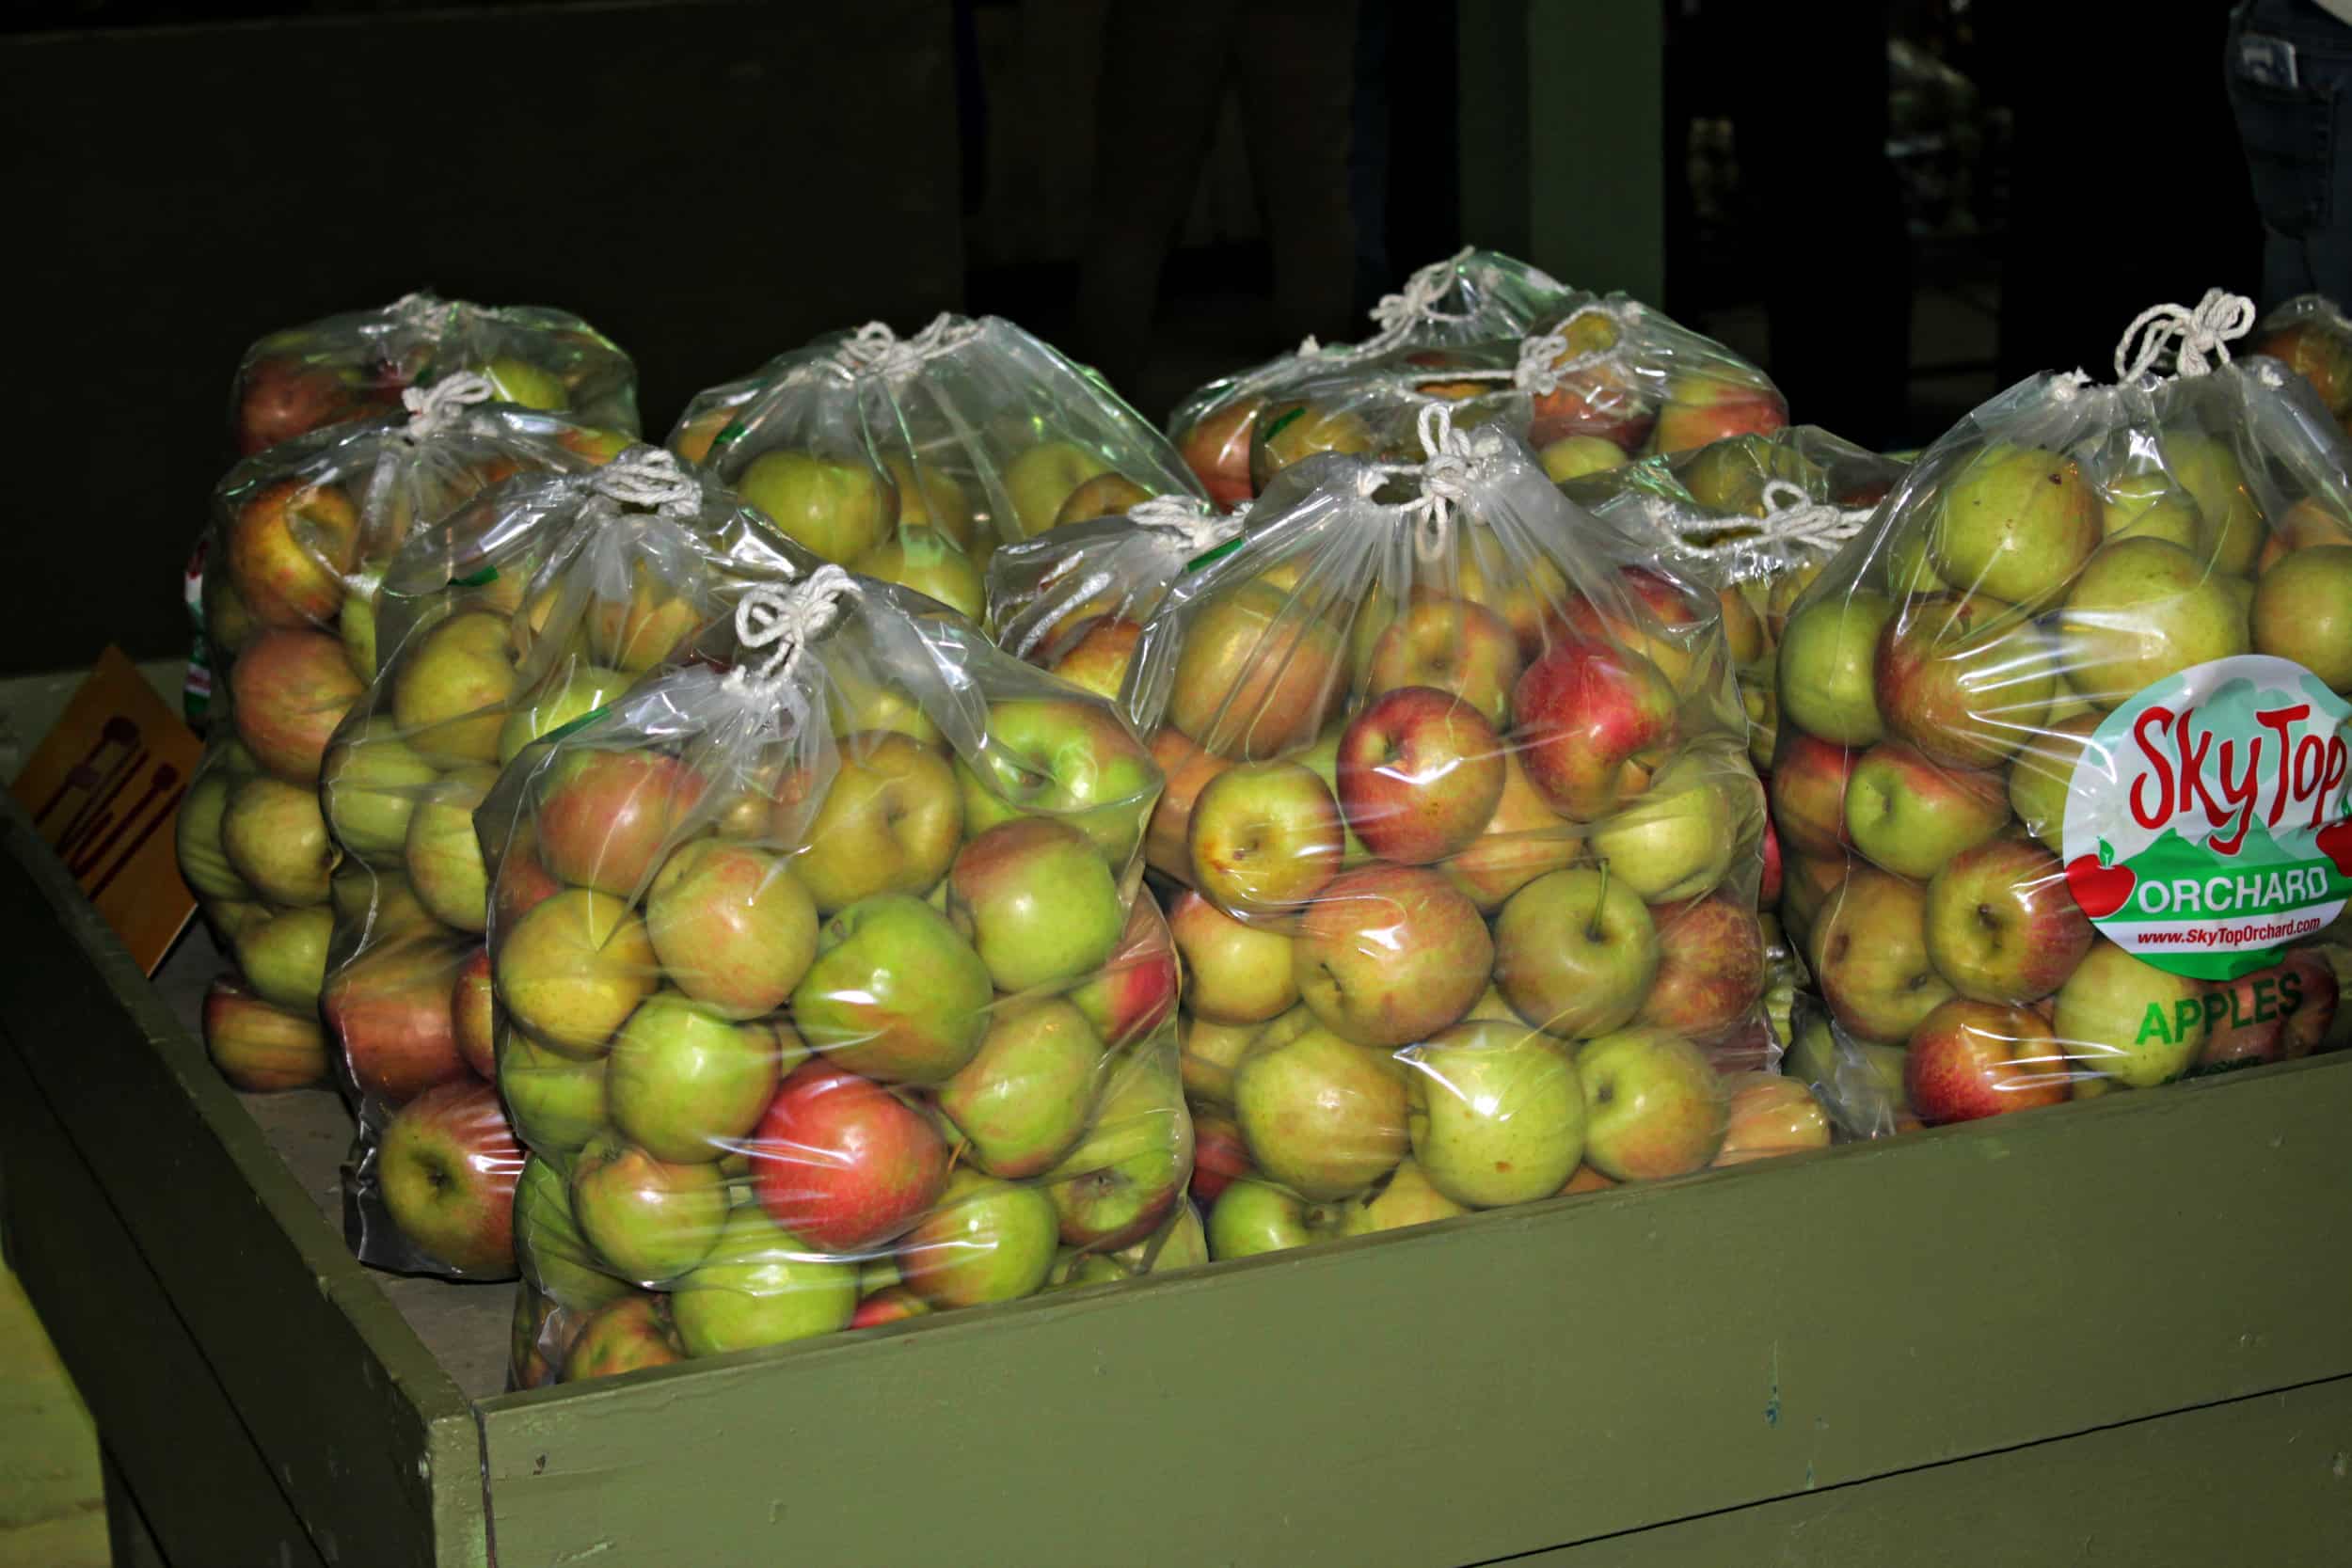 Above is an image of pre-made apple bags that can be bought if there is no time to pick personally. These bags are priced at $20.